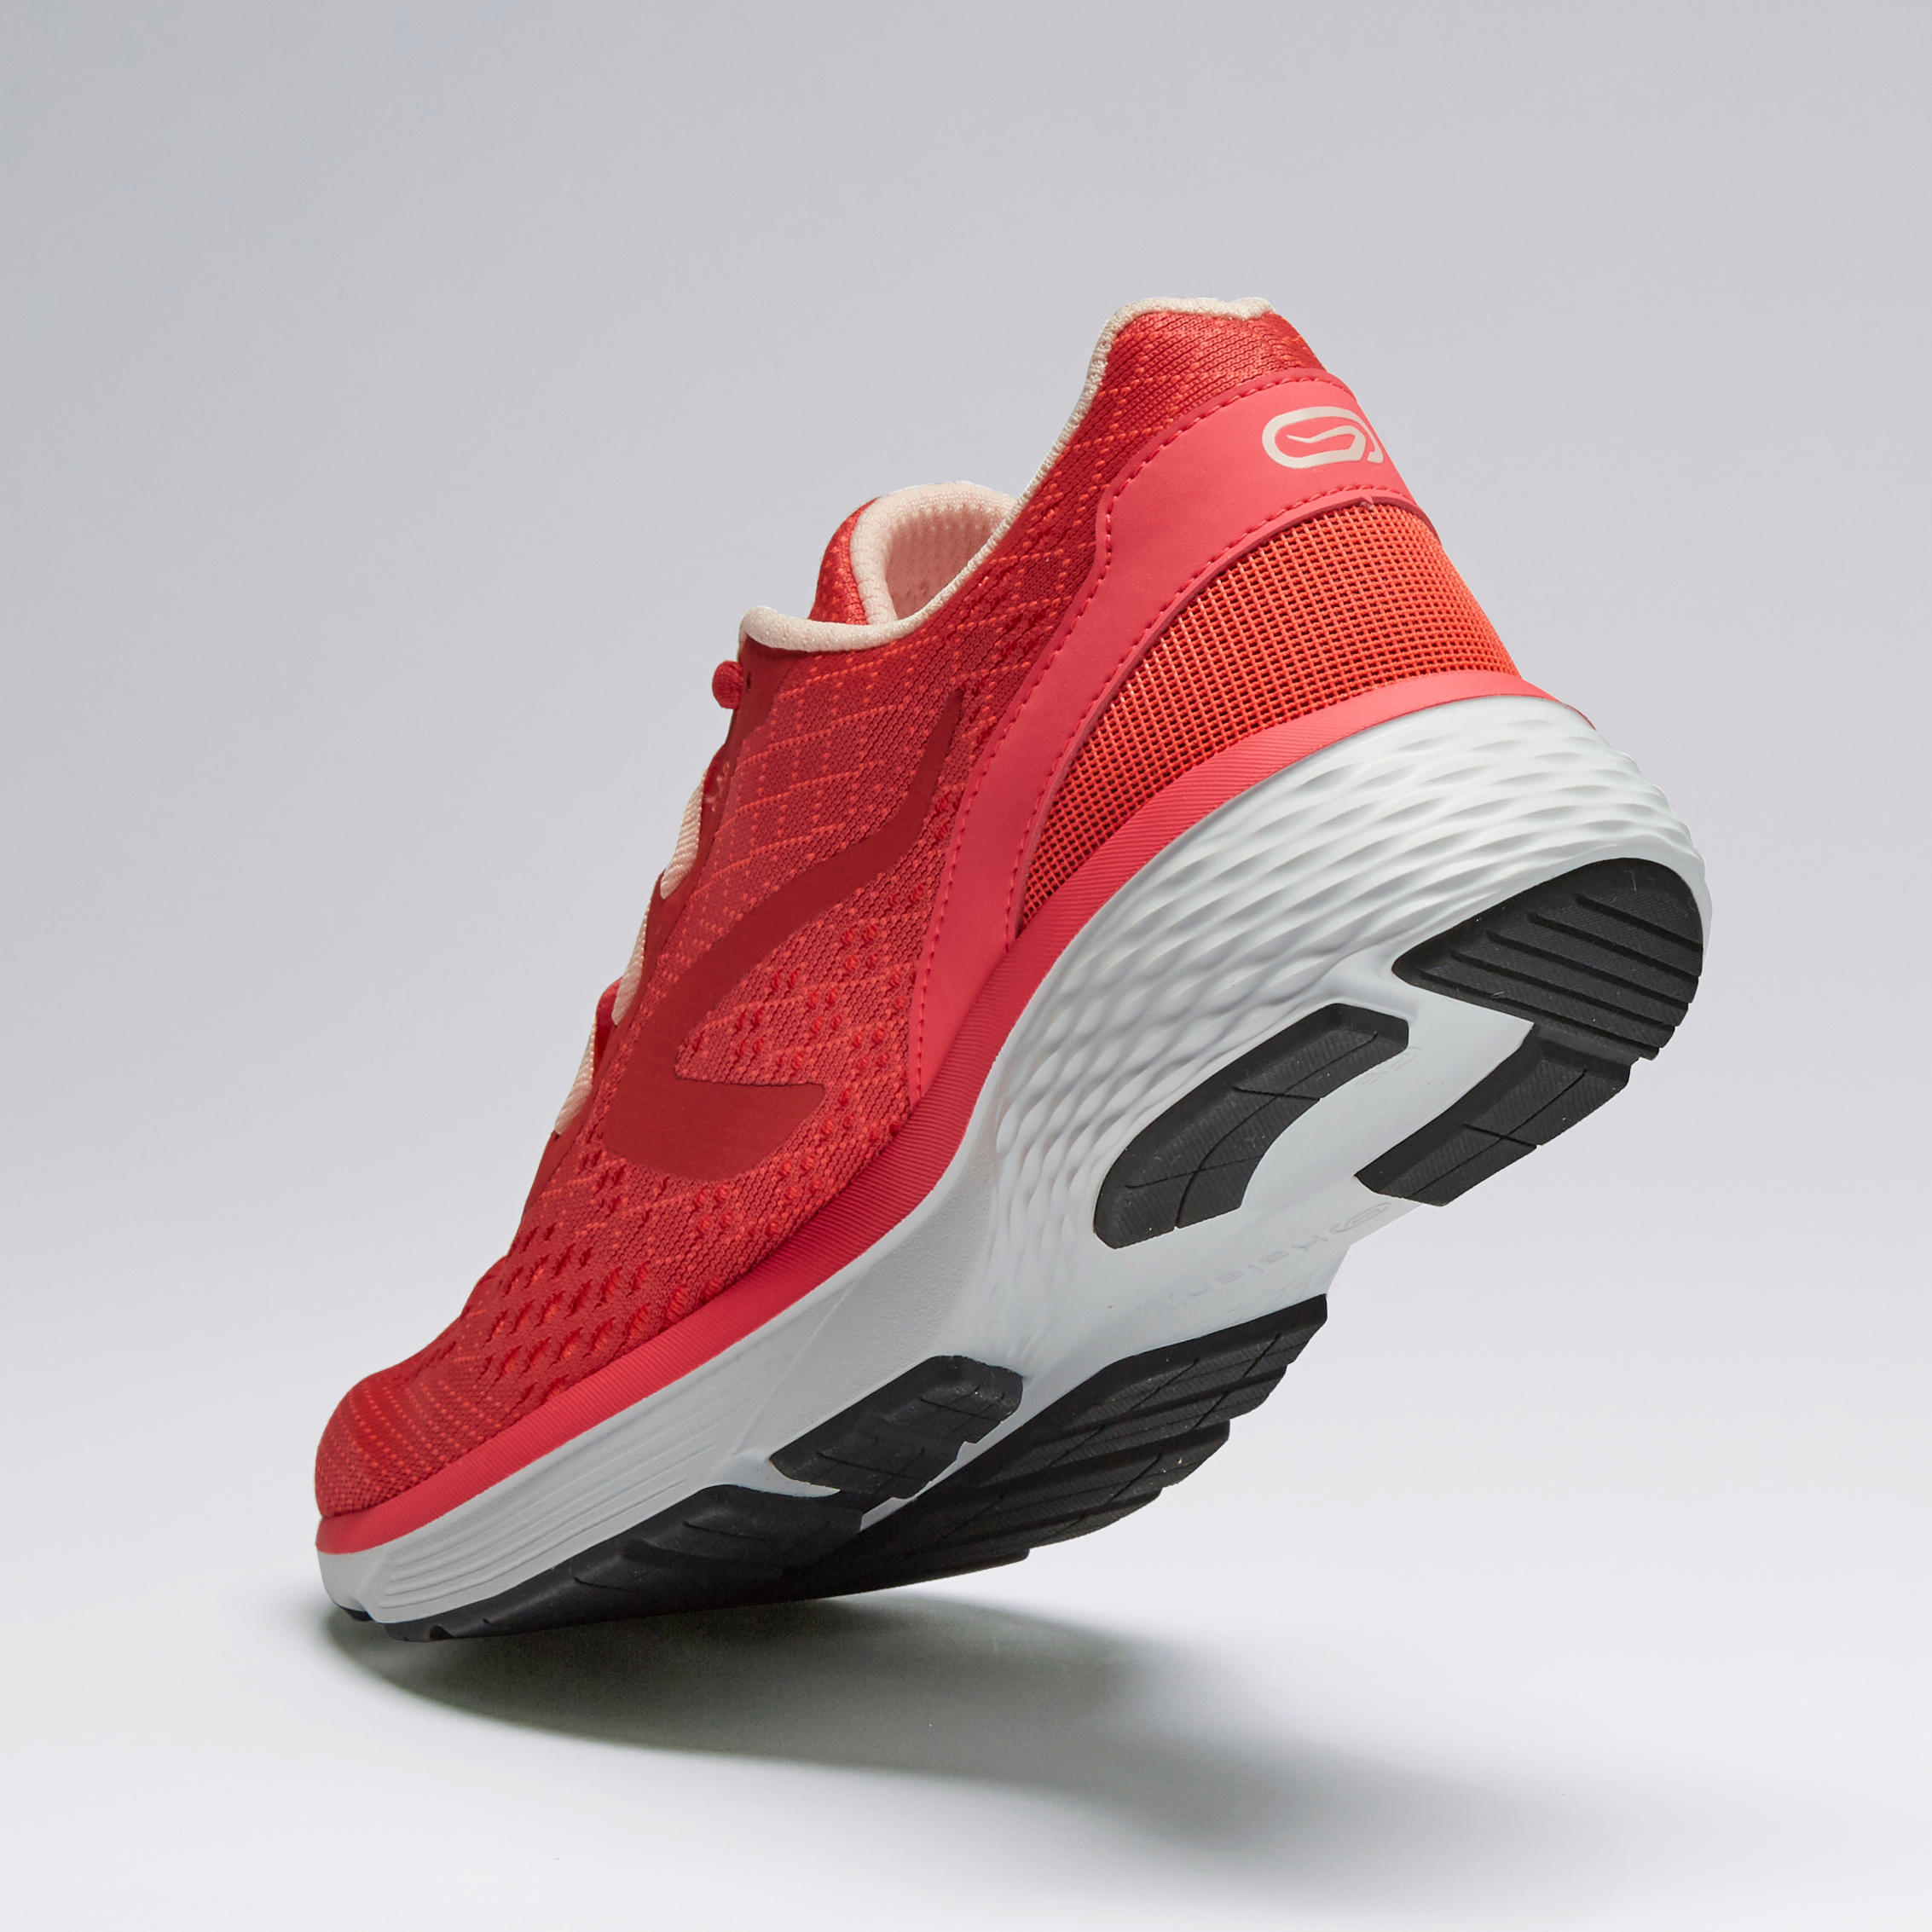 coral running shoes